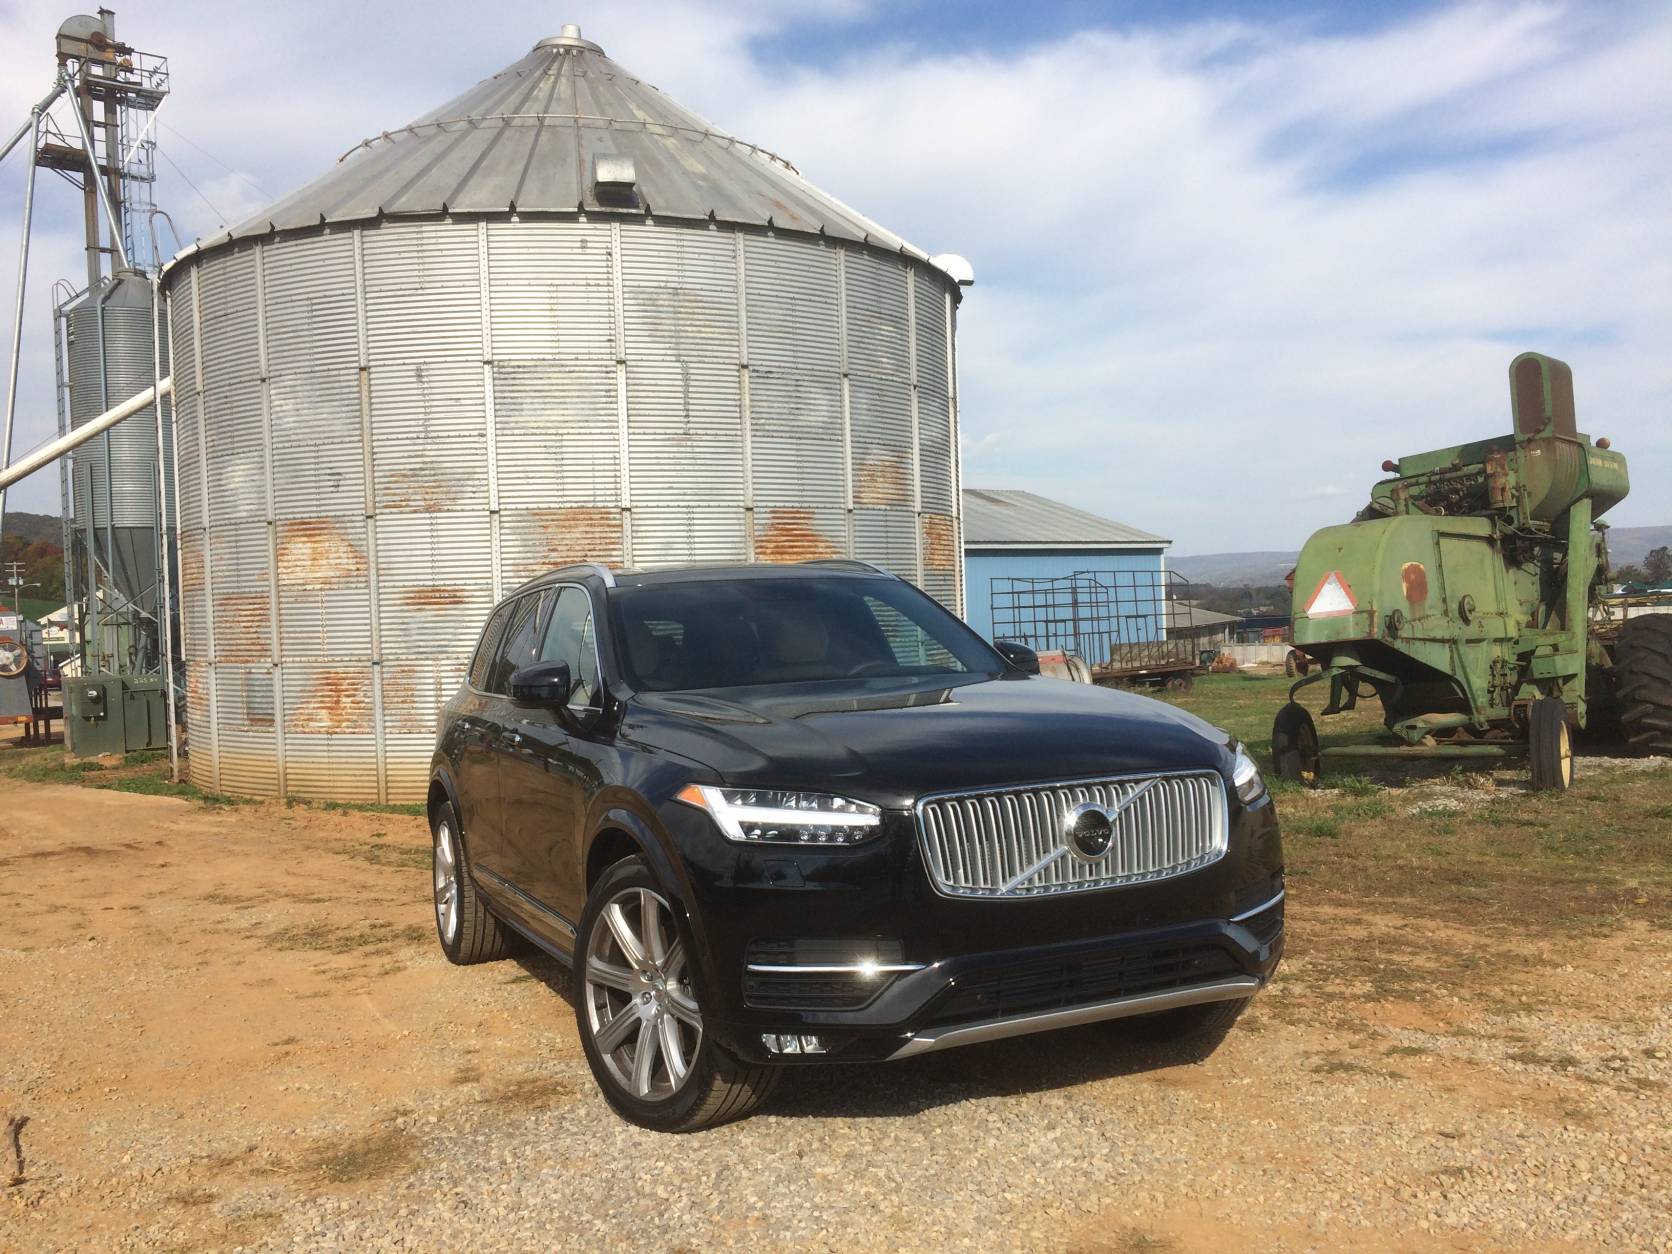 This Volvo XC-90 has Thor’s Hammer headlights, which give the appearance of the mythical hammer in the headlight cluster. (WTOP/Mike Parris)